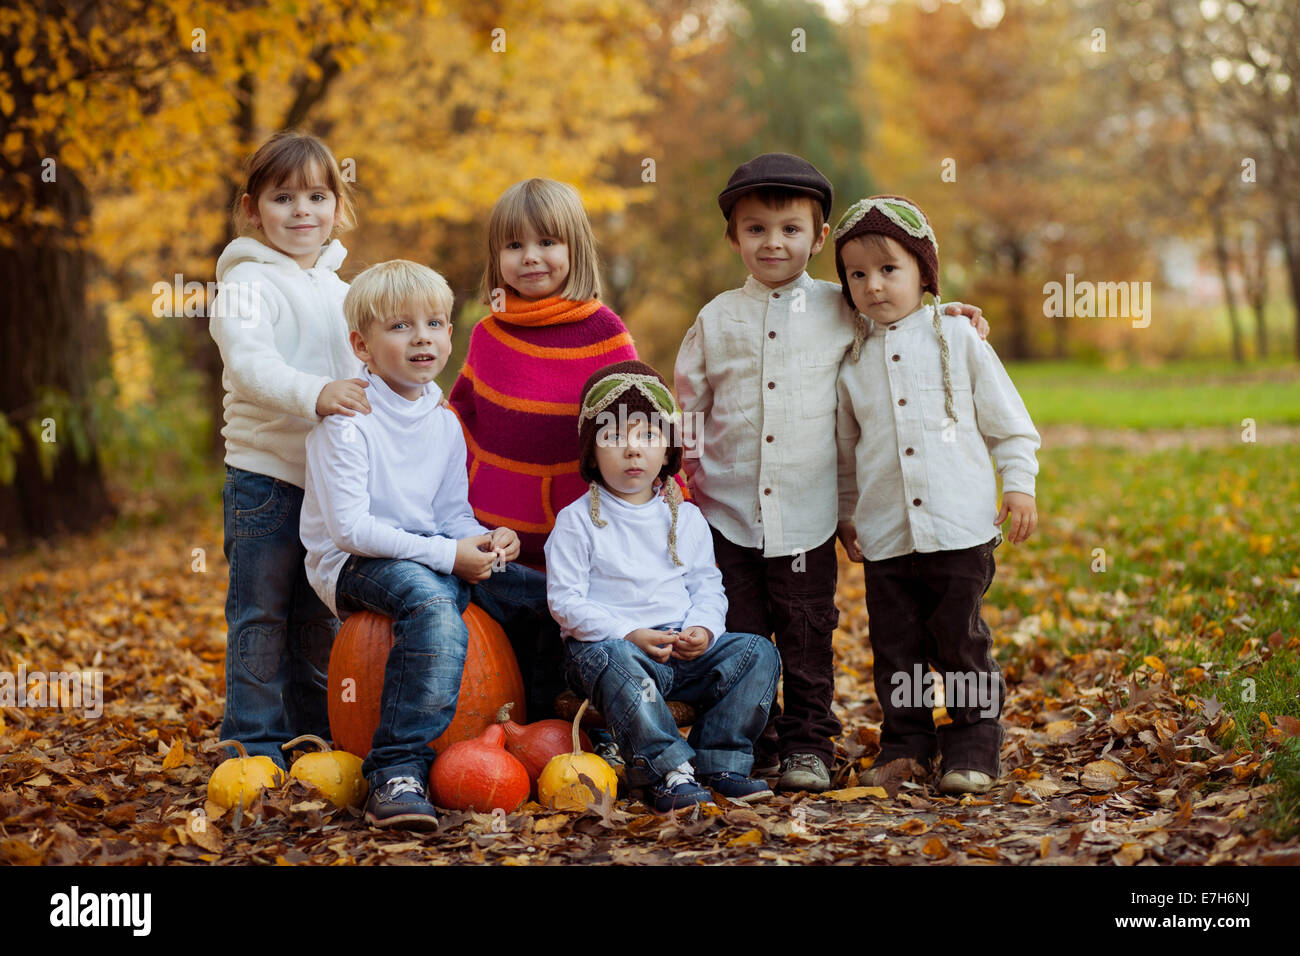 Autumn portrait of group of happy kids, outdoor in the park Stock Photo